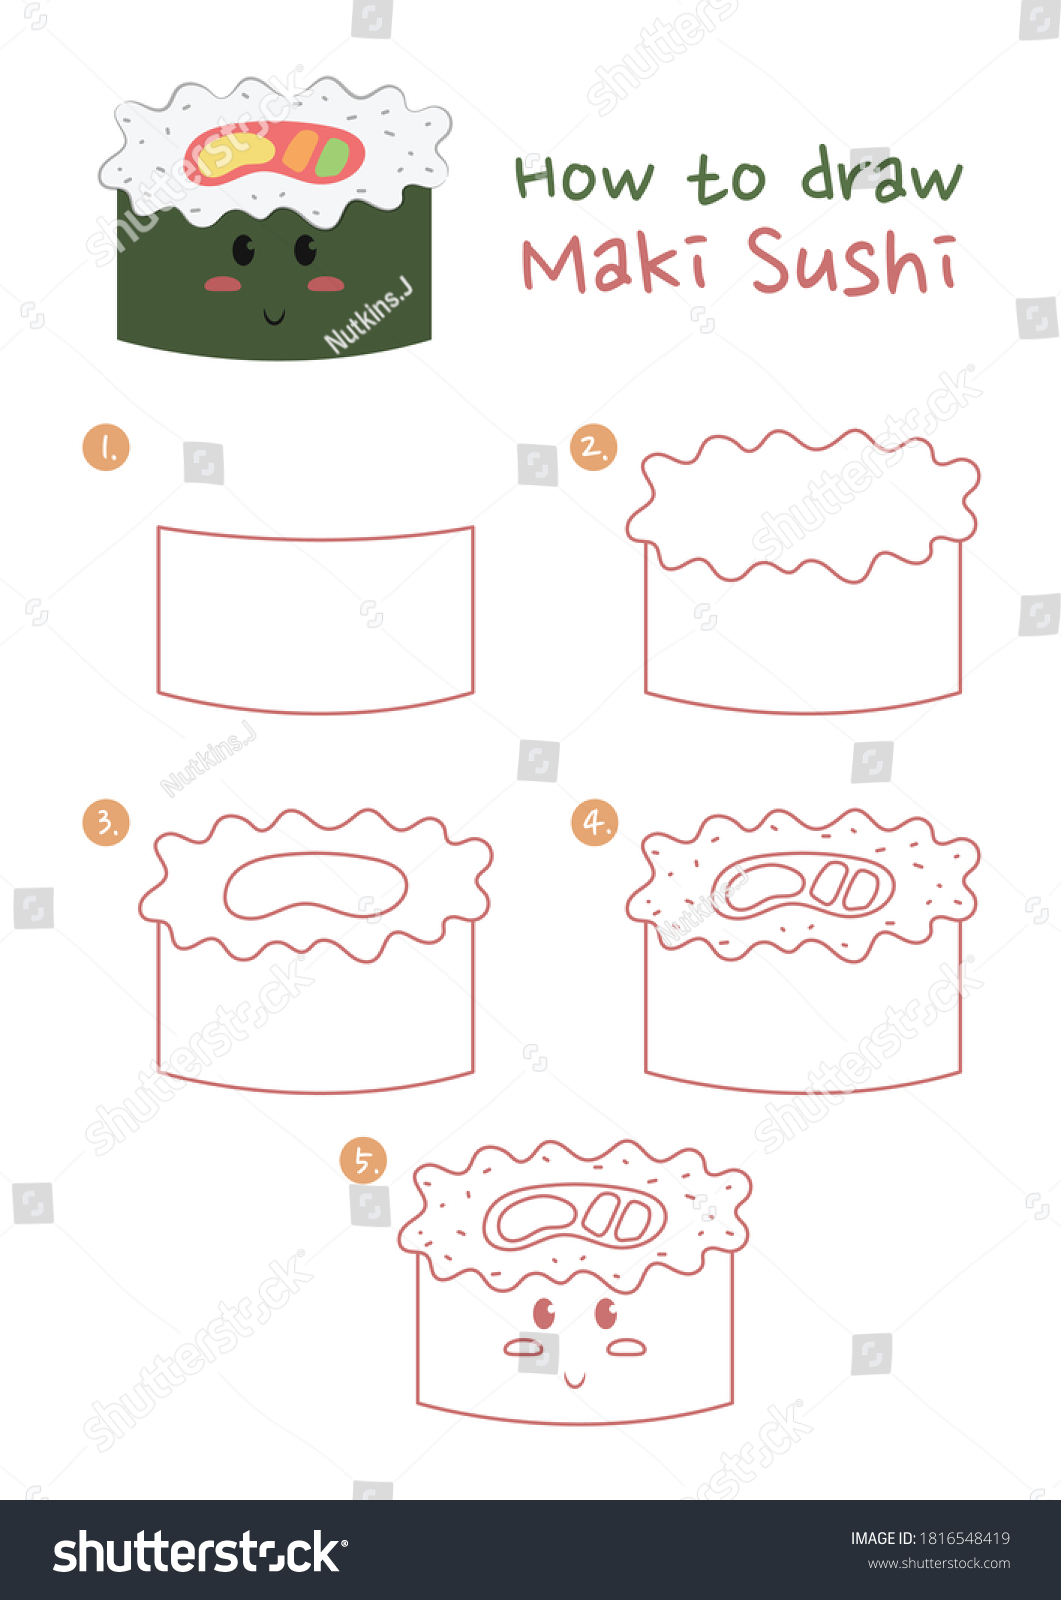 how to draw cartoon food that will make you hungry on easy food drawings step by step